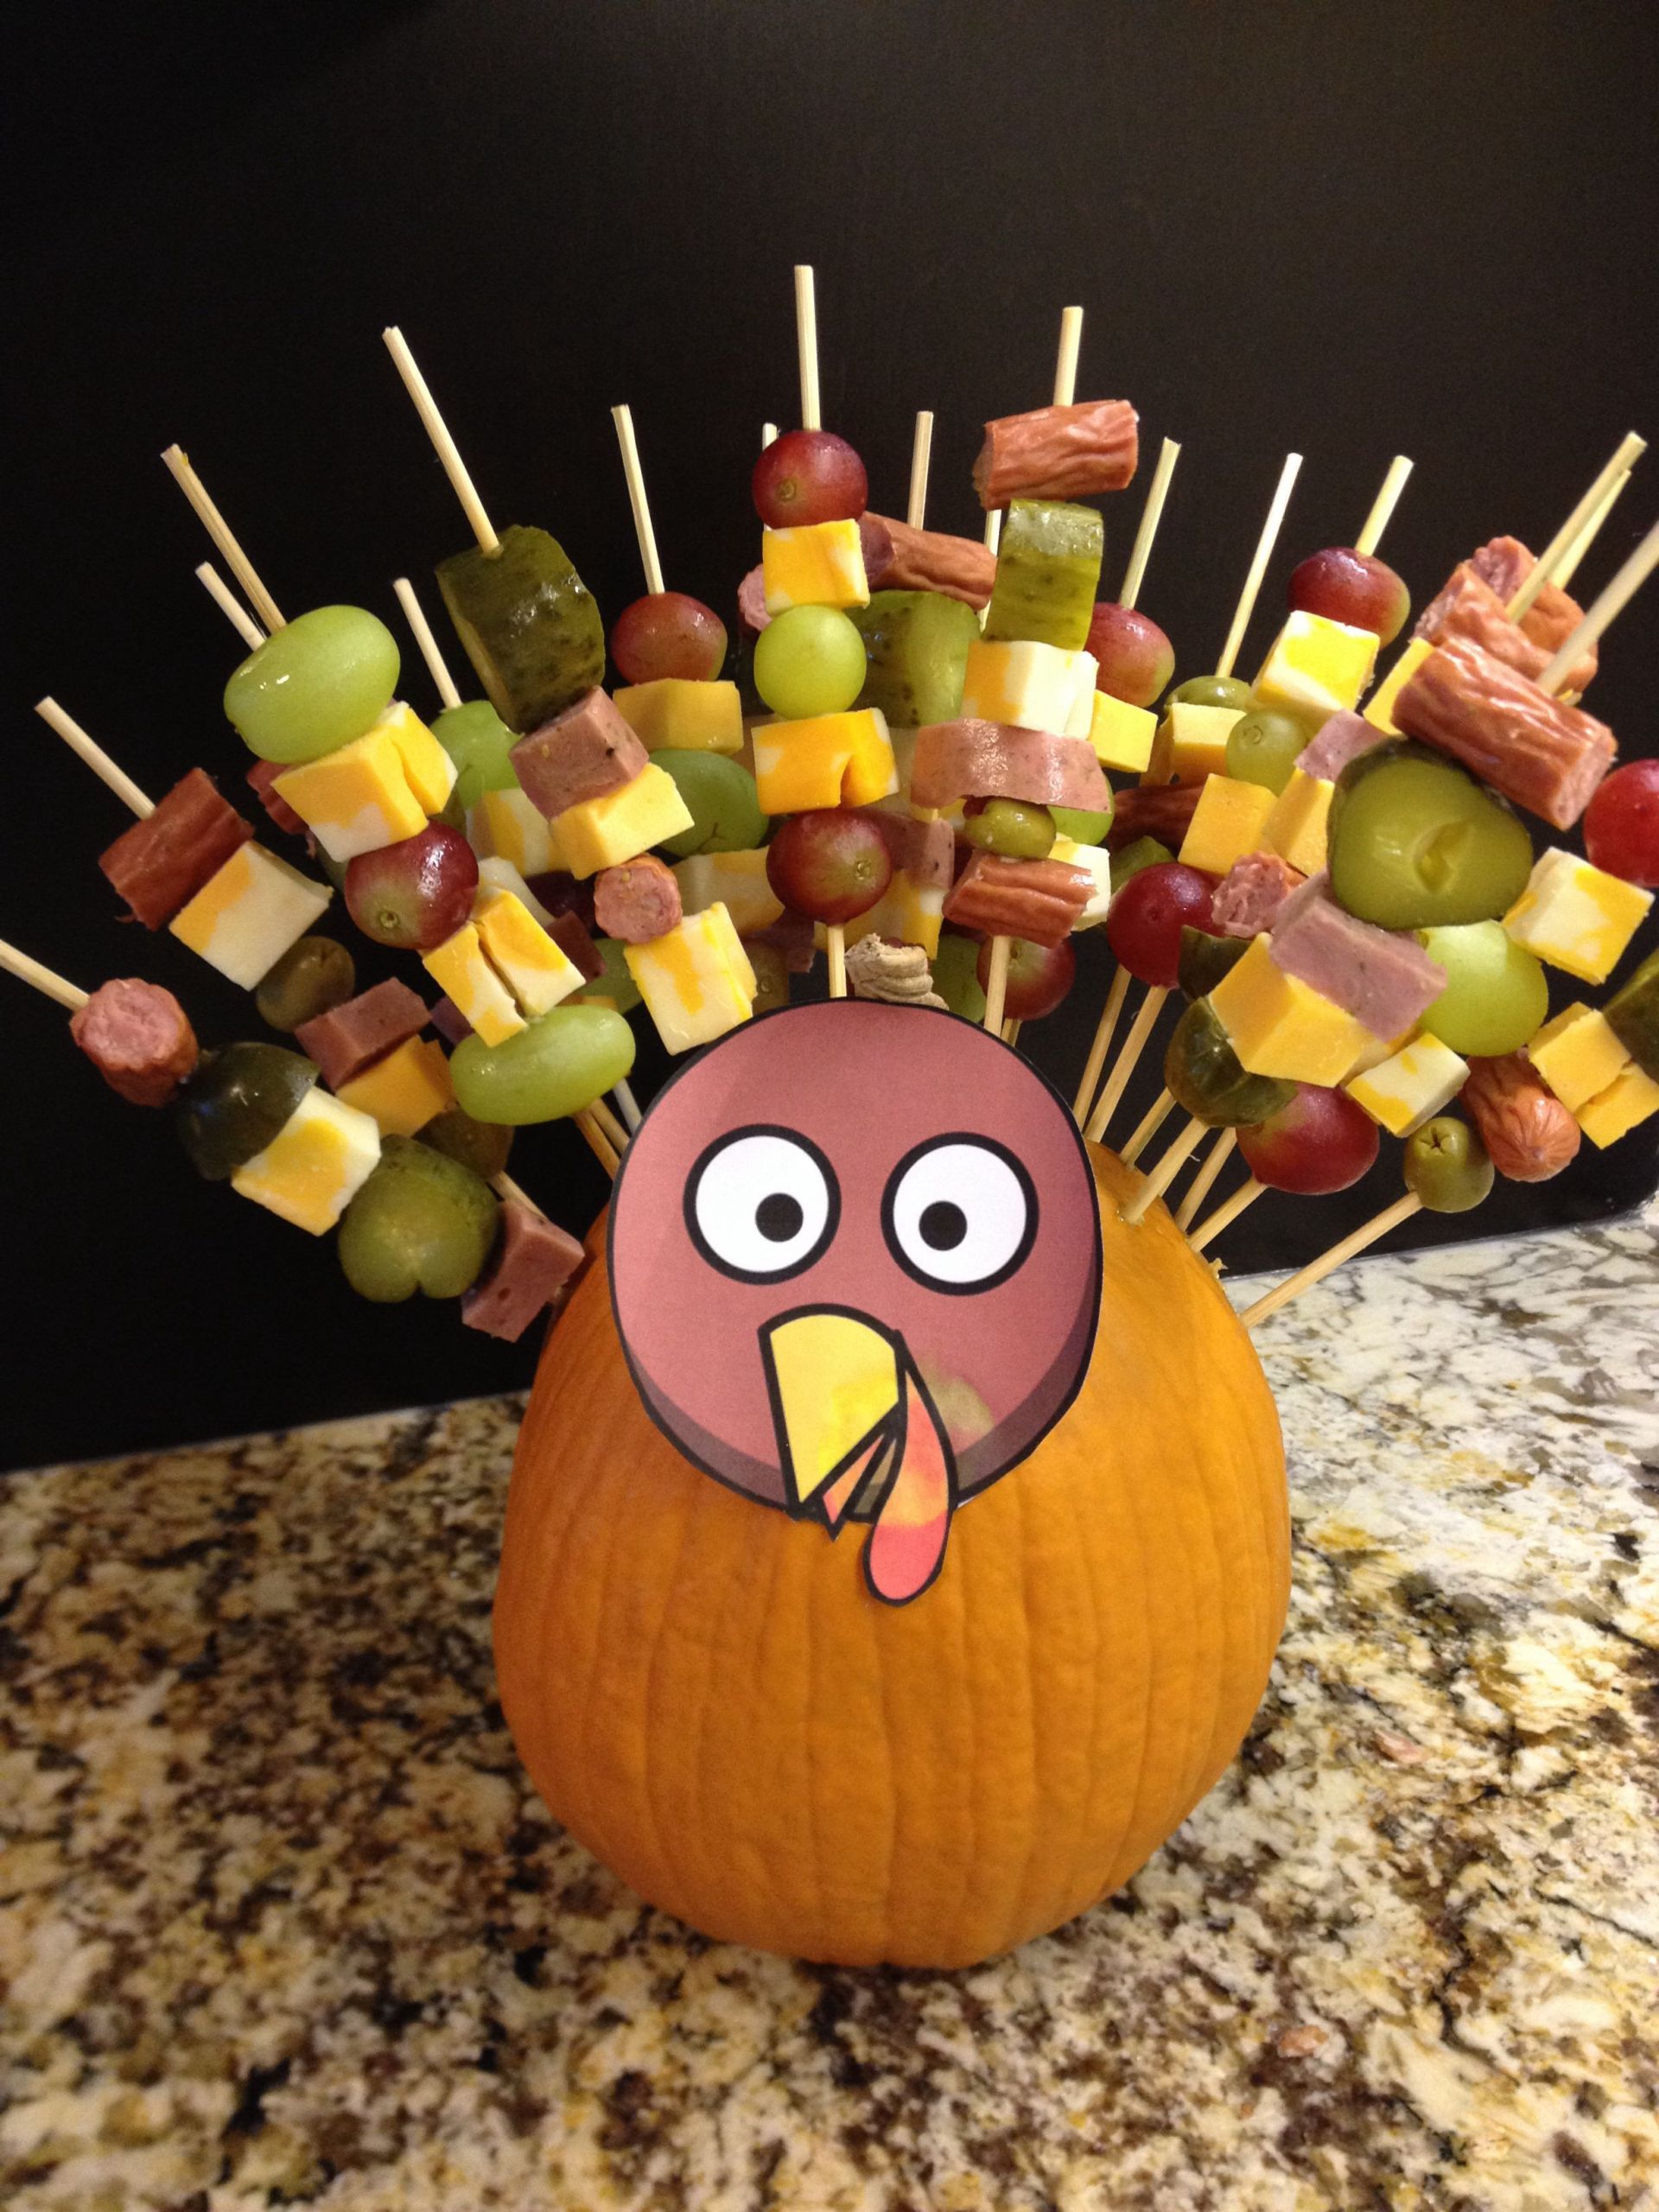 Appetizers For Thanksgiving Dinner Party
 For the kiddos as a Thanksgiving day appetizer for our